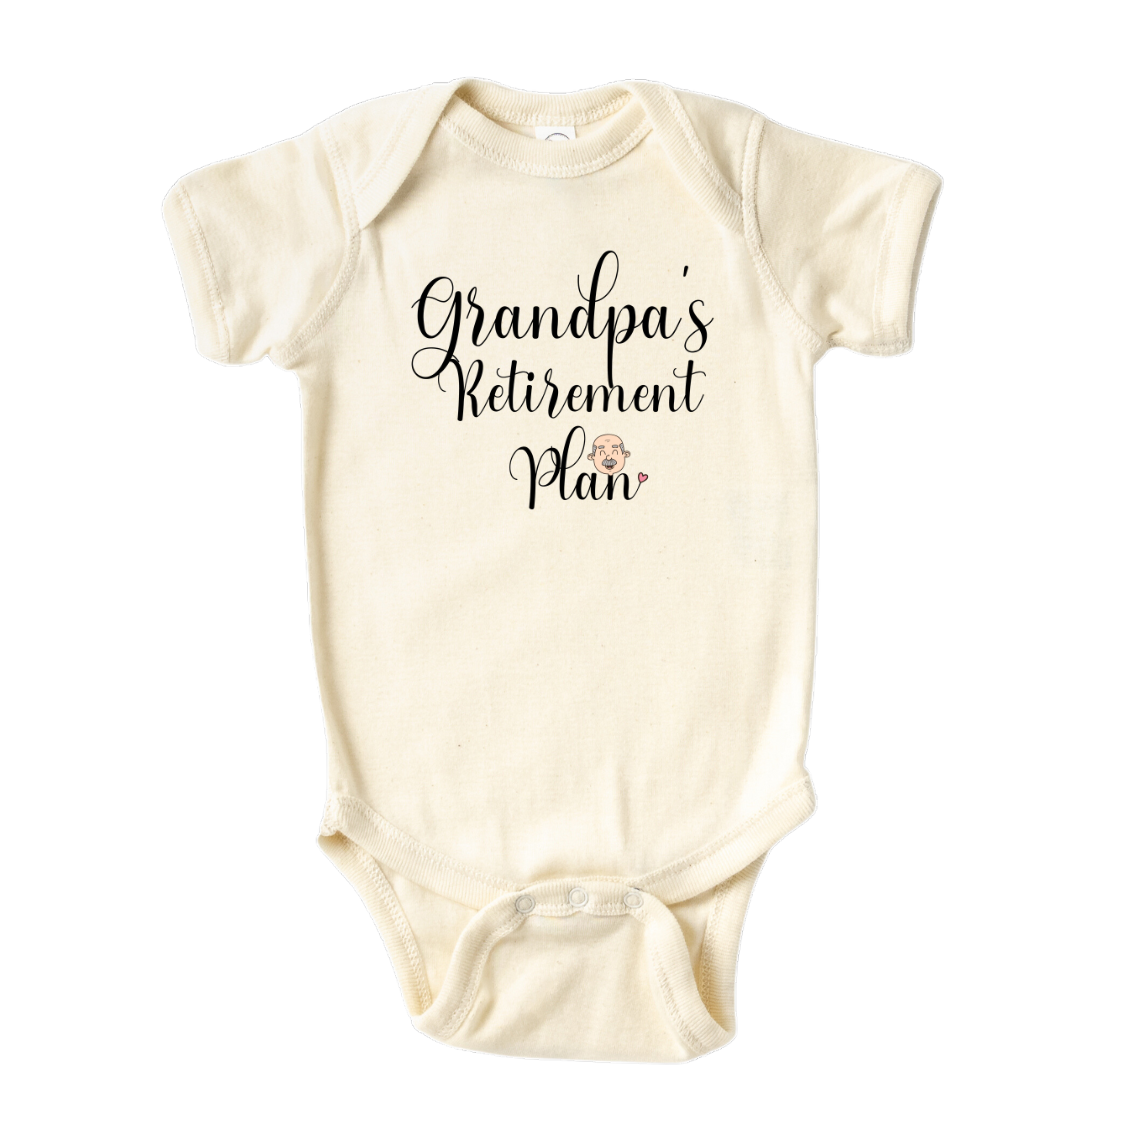 Natural Baby Clothes - kid's t-shirt with a cute printed graphic that says 'Grandpa's Retirement Plan.' The shirt features a colorful design and is made from high-quality materials. It's a perfect gift for little ones who love their grandpas and will bring joy to any child's wardrobe.